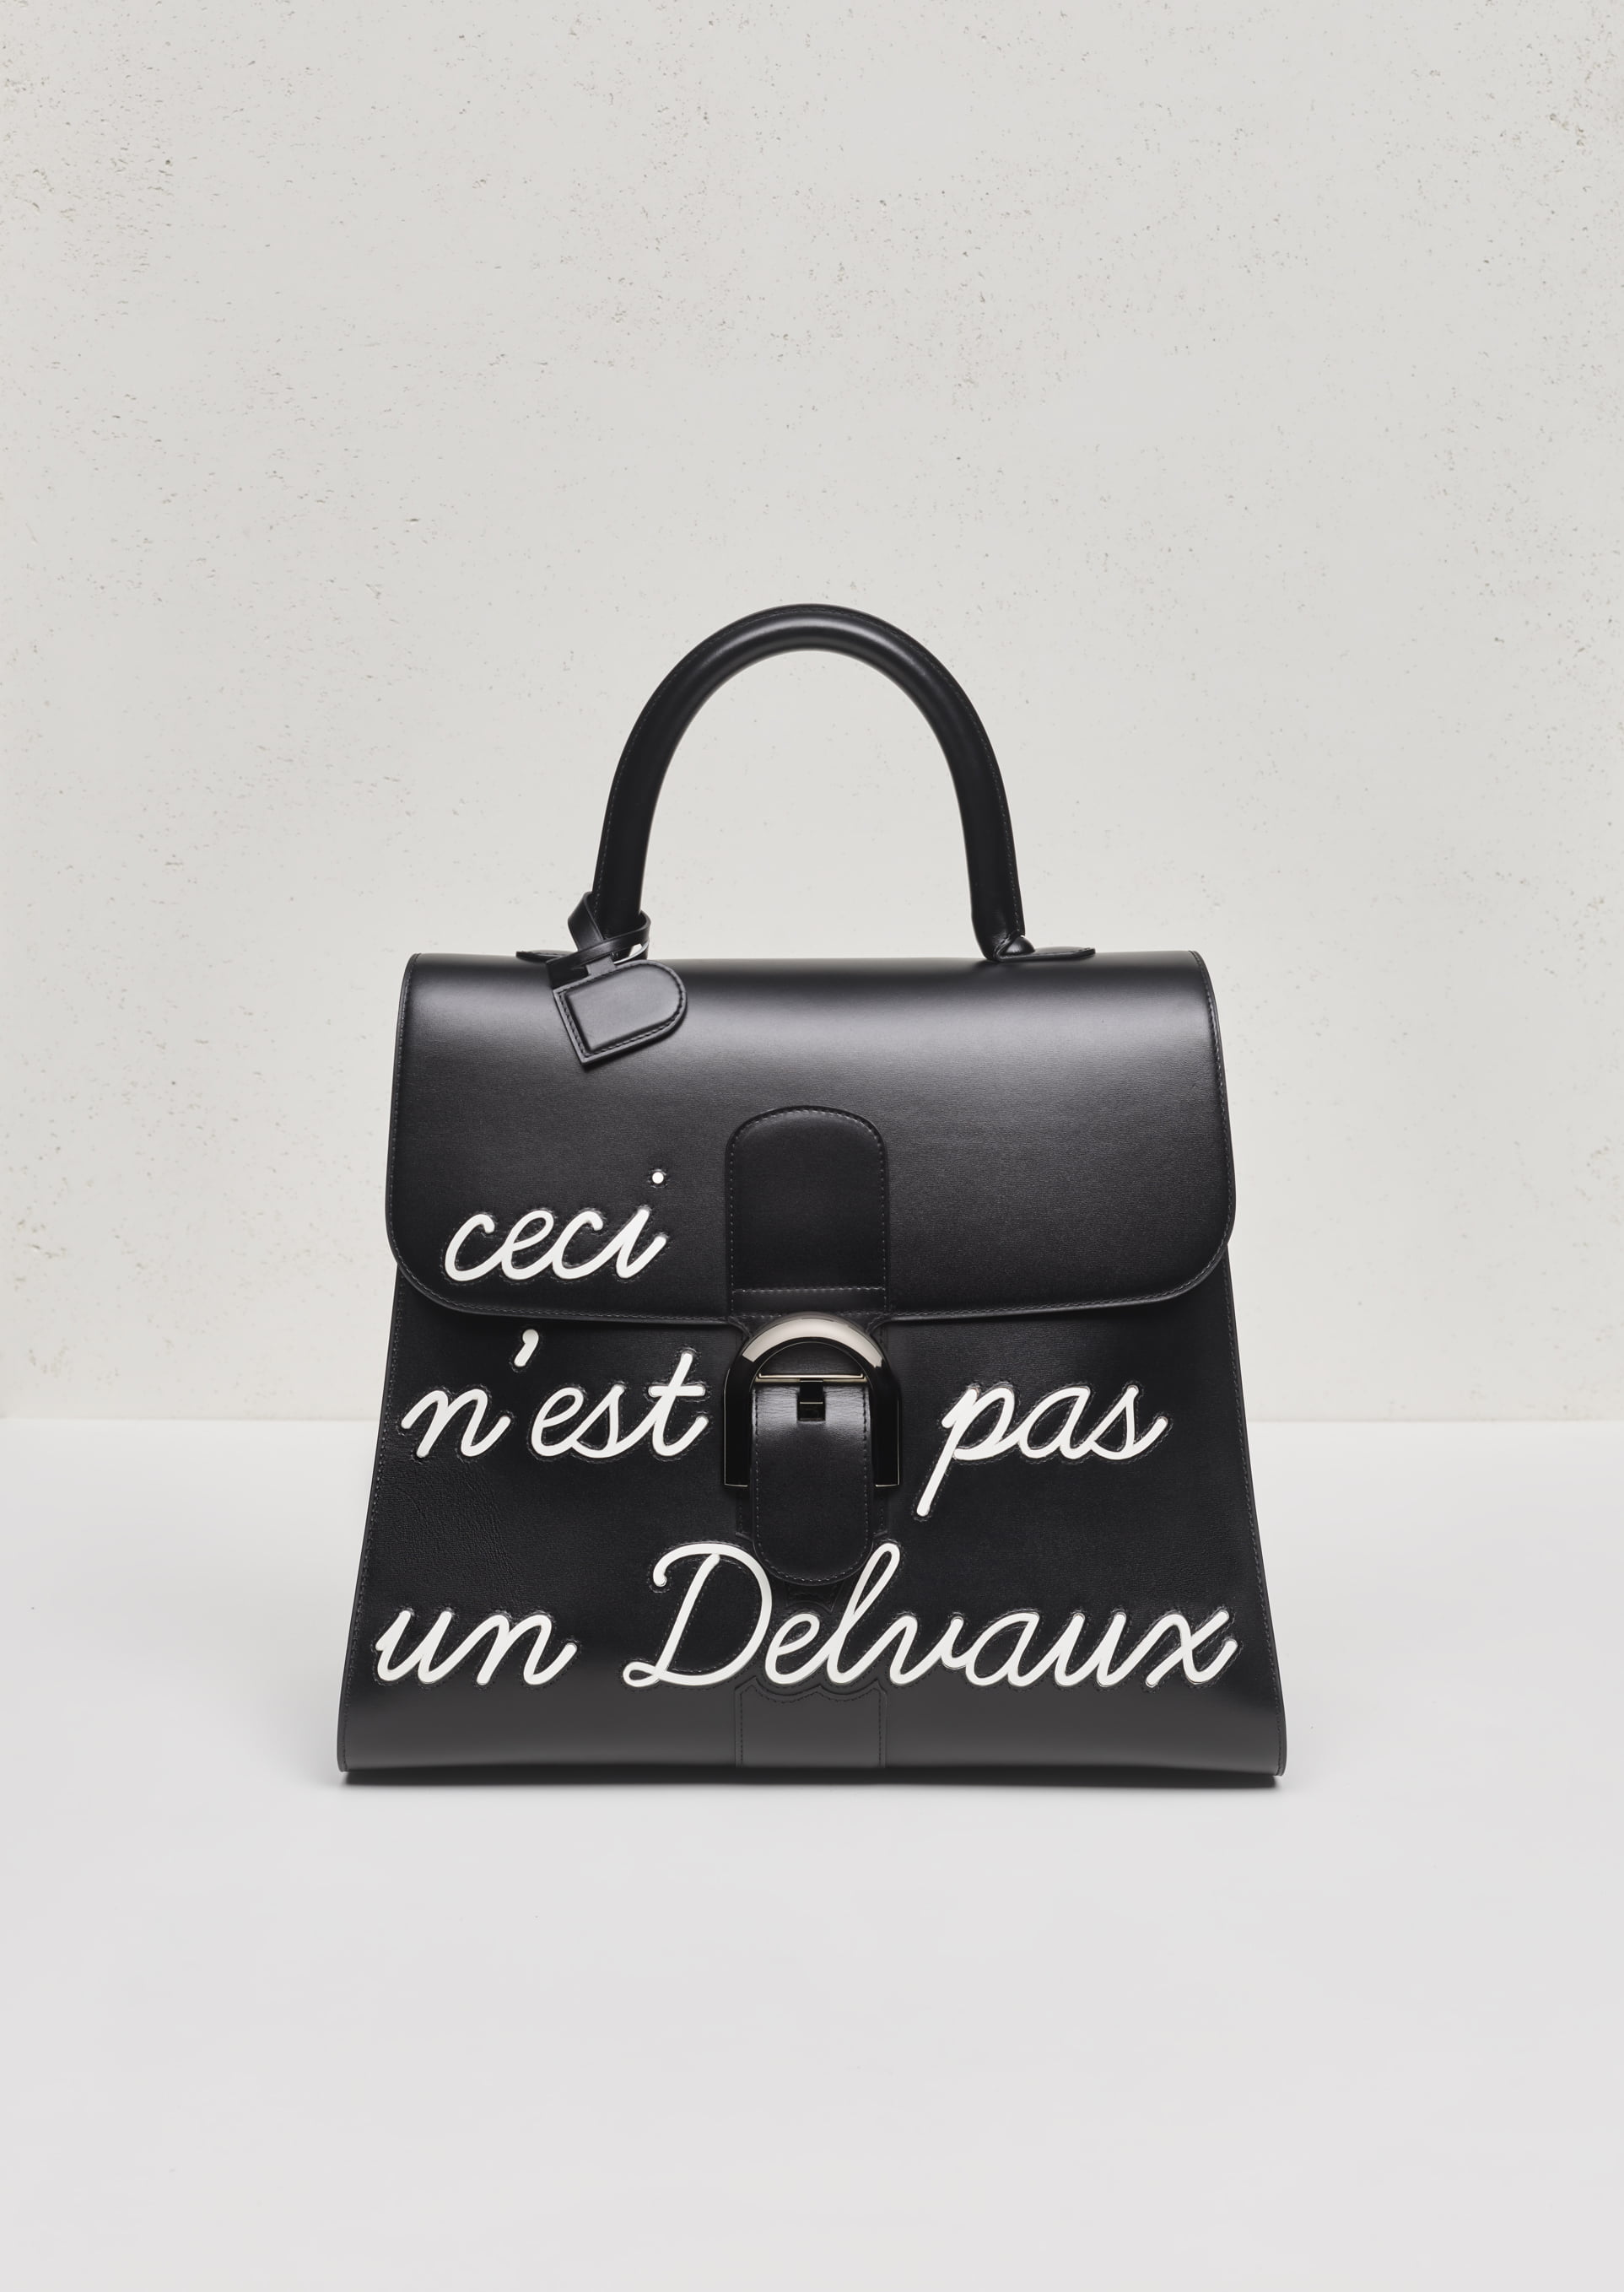 Delvaux's latest Miniatures celebrate Best of British with Belgian wit